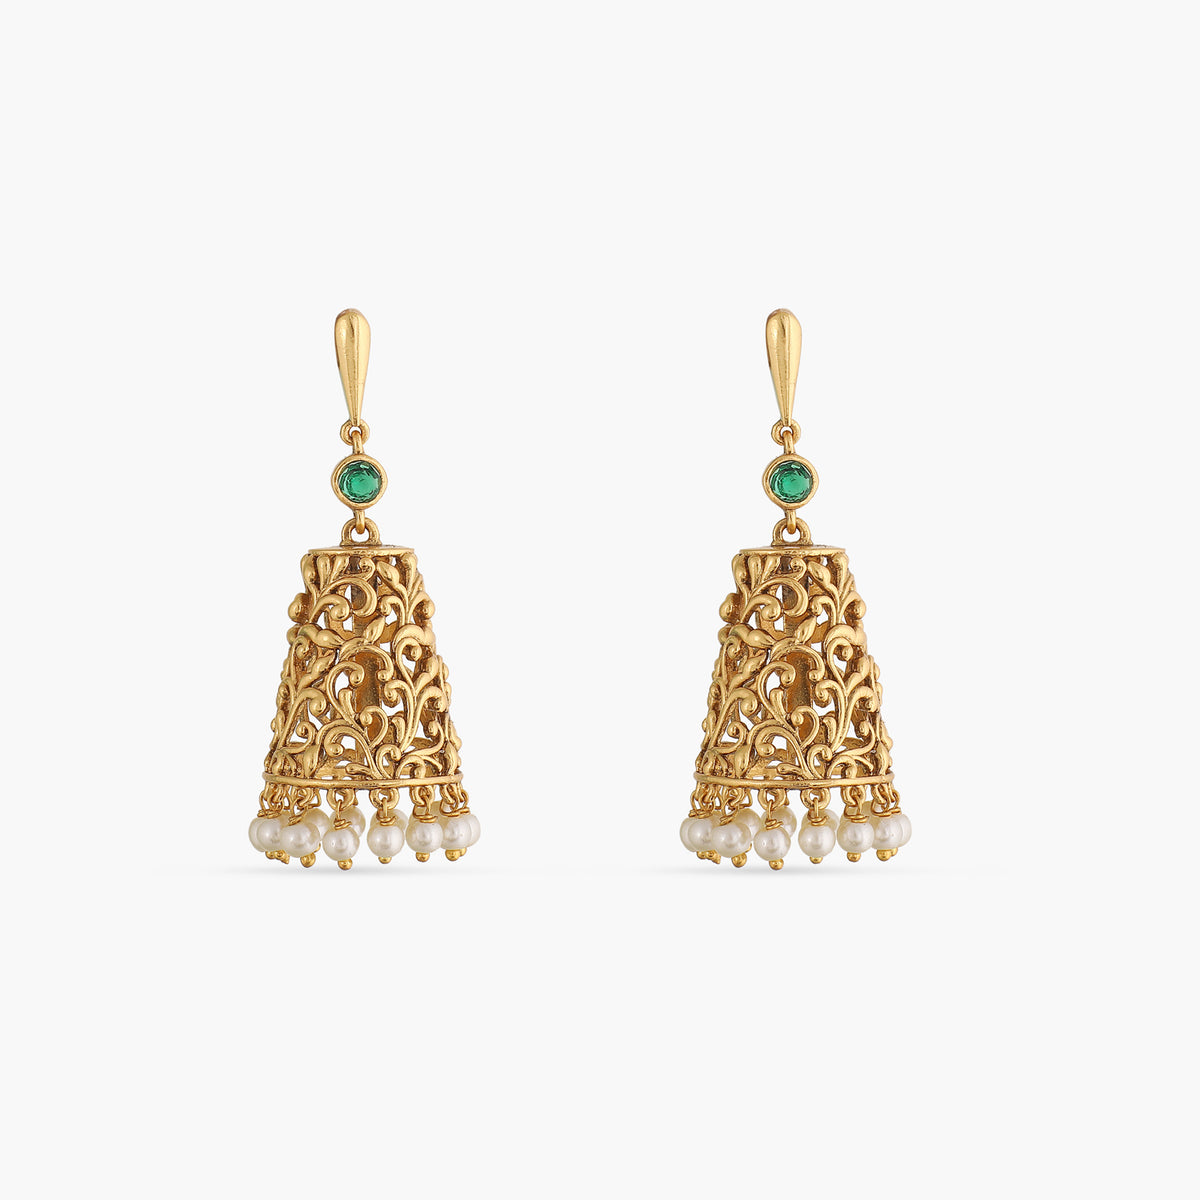 A picture of a pair of Indian artificial gold plated jhumka earrings with pearls and turquoise stones.